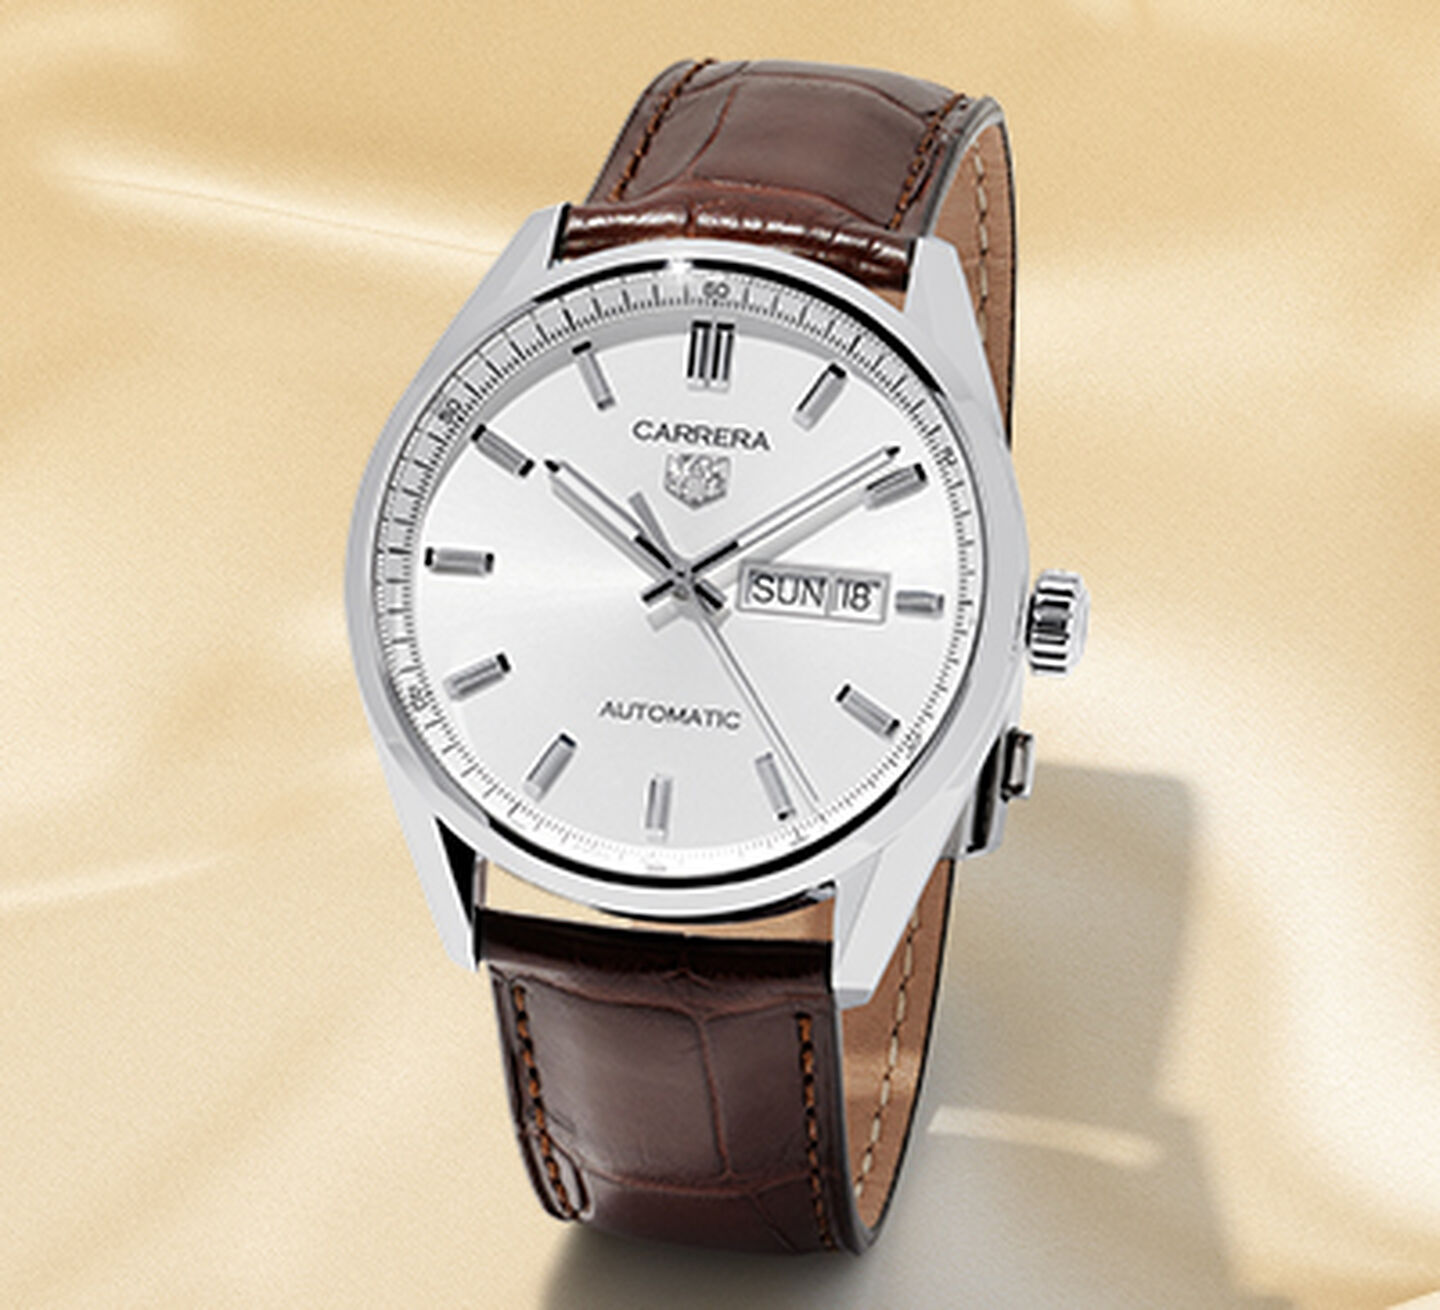 Tag Heuer watch with white dial on brown leather alligator strap with gold satin background